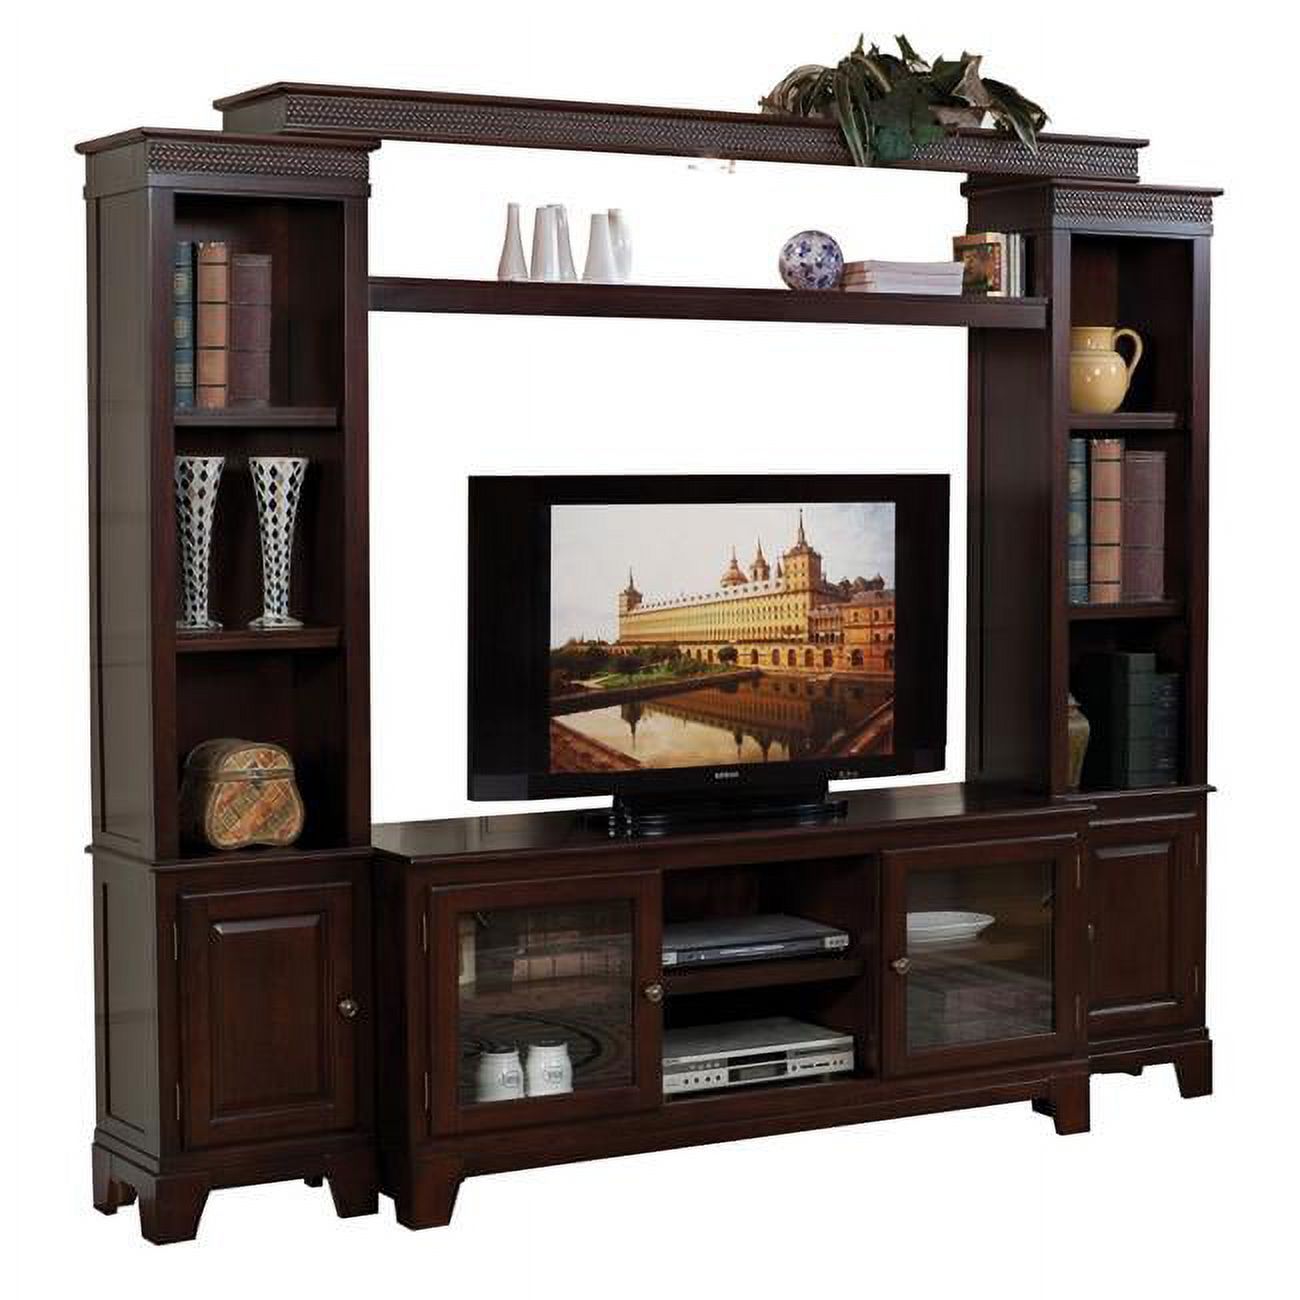 19" X 58" X 26" Merlot Wood Glass TV Stand TV Stand - image 1 of 2